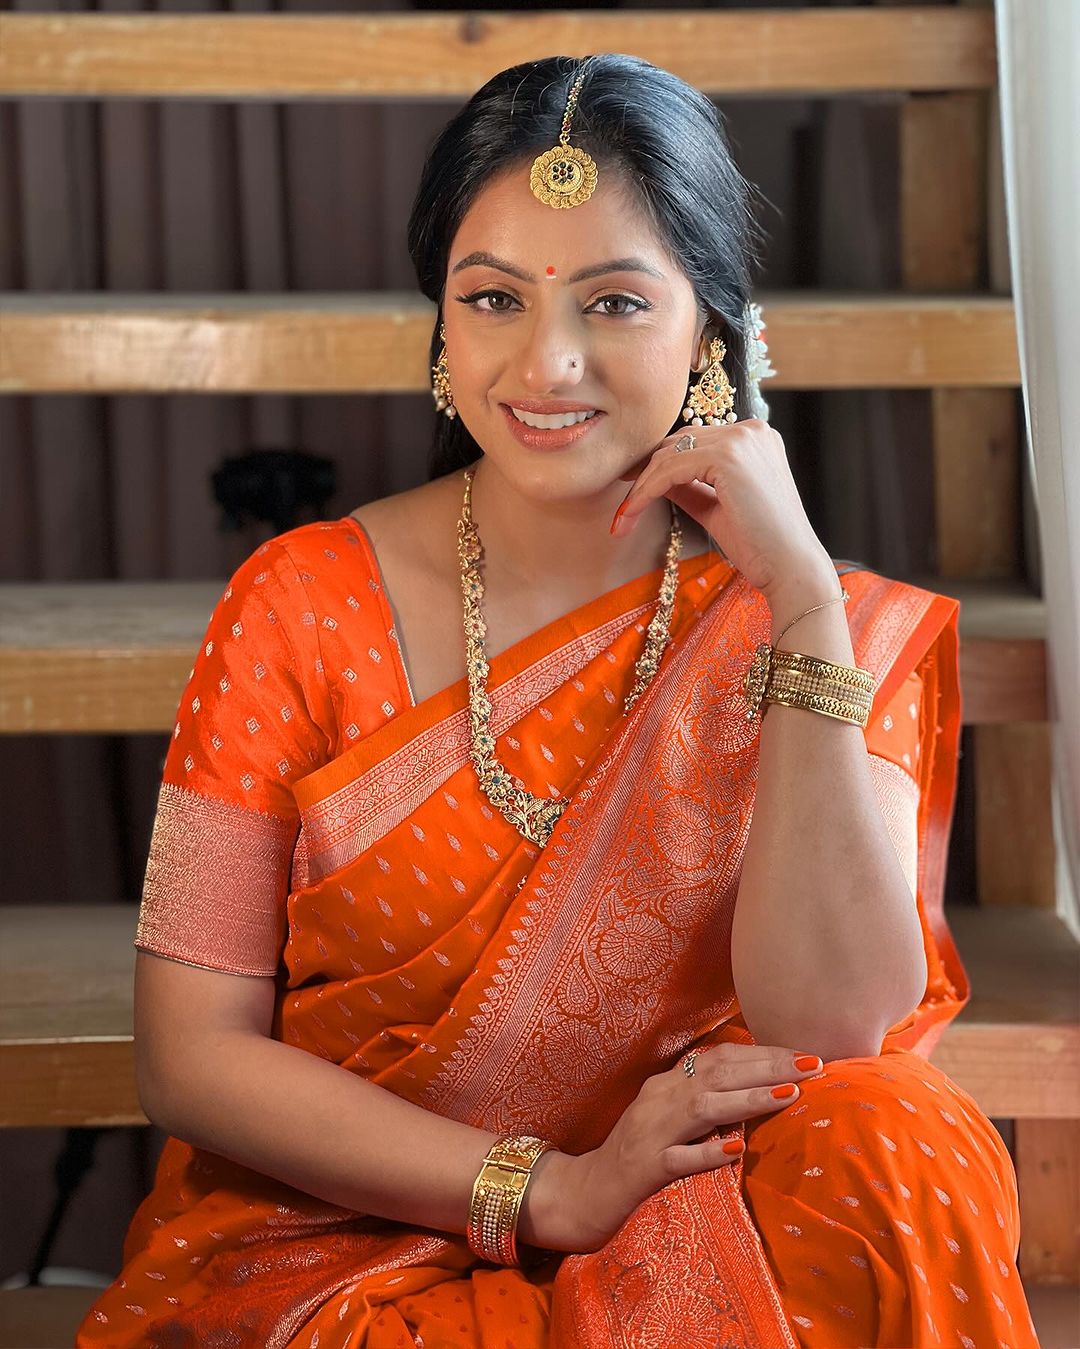 Sensation Actress Deepika Singh On New Show “Mangal Lakshmi” Who Says “I Am Thrilled To Step Into The Shoes Of Mangal”!